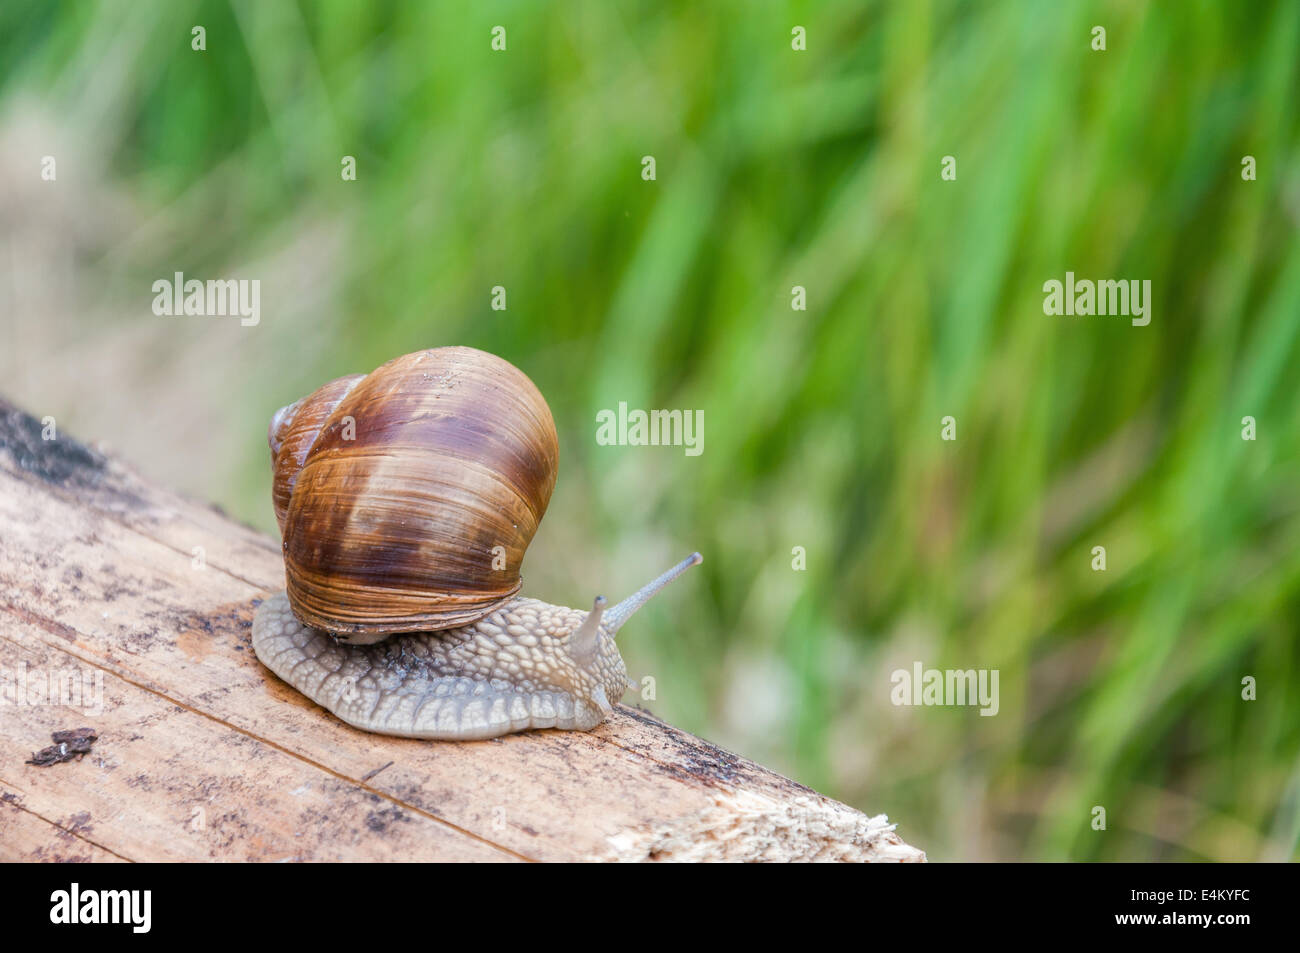 Snail crawling over a piece of wood Stock Photo